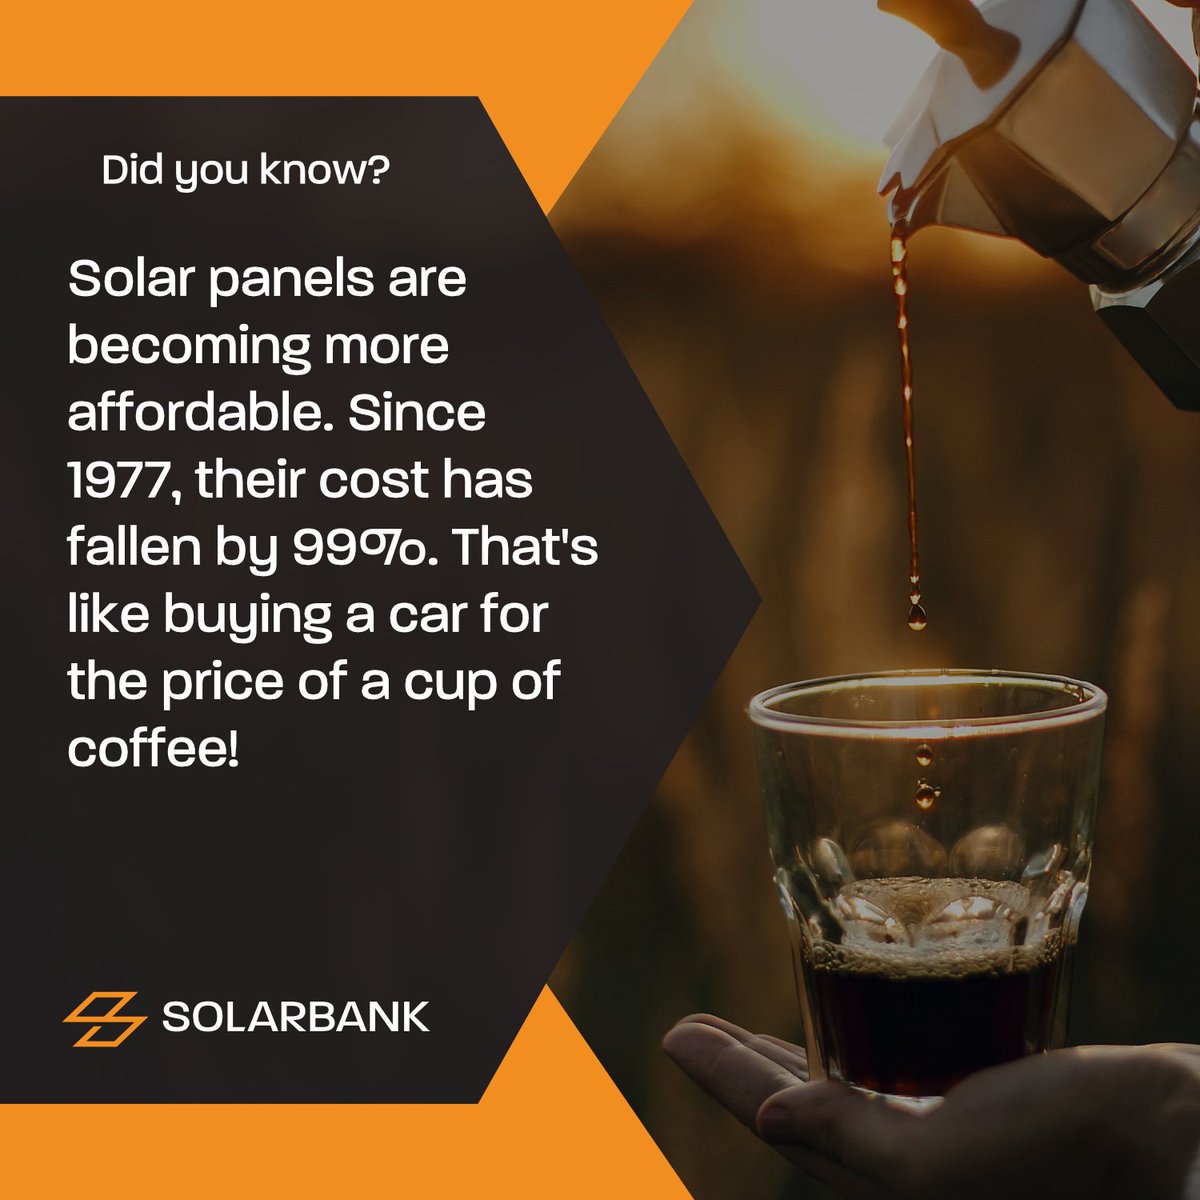 Solar panels are becoming more affordable..
#AffordableEnergy #SolarFacts #TheMoreYouKnow #Sustainability